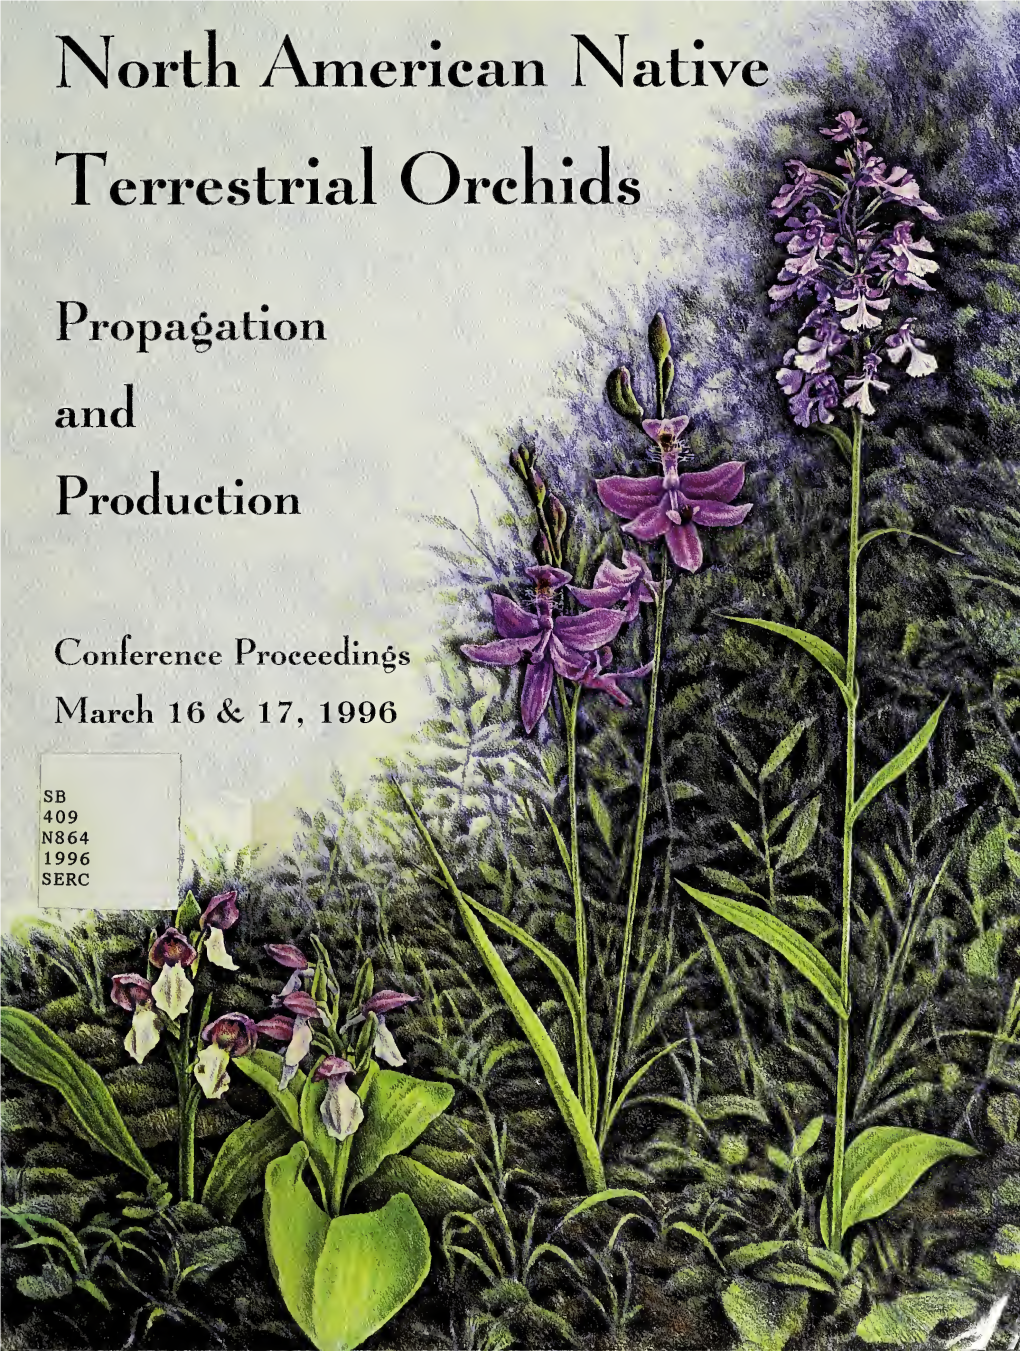 North American Native Terrestrial Orchids : Propagation and Production : Conference Proceedings, March 16 & 17, 1996